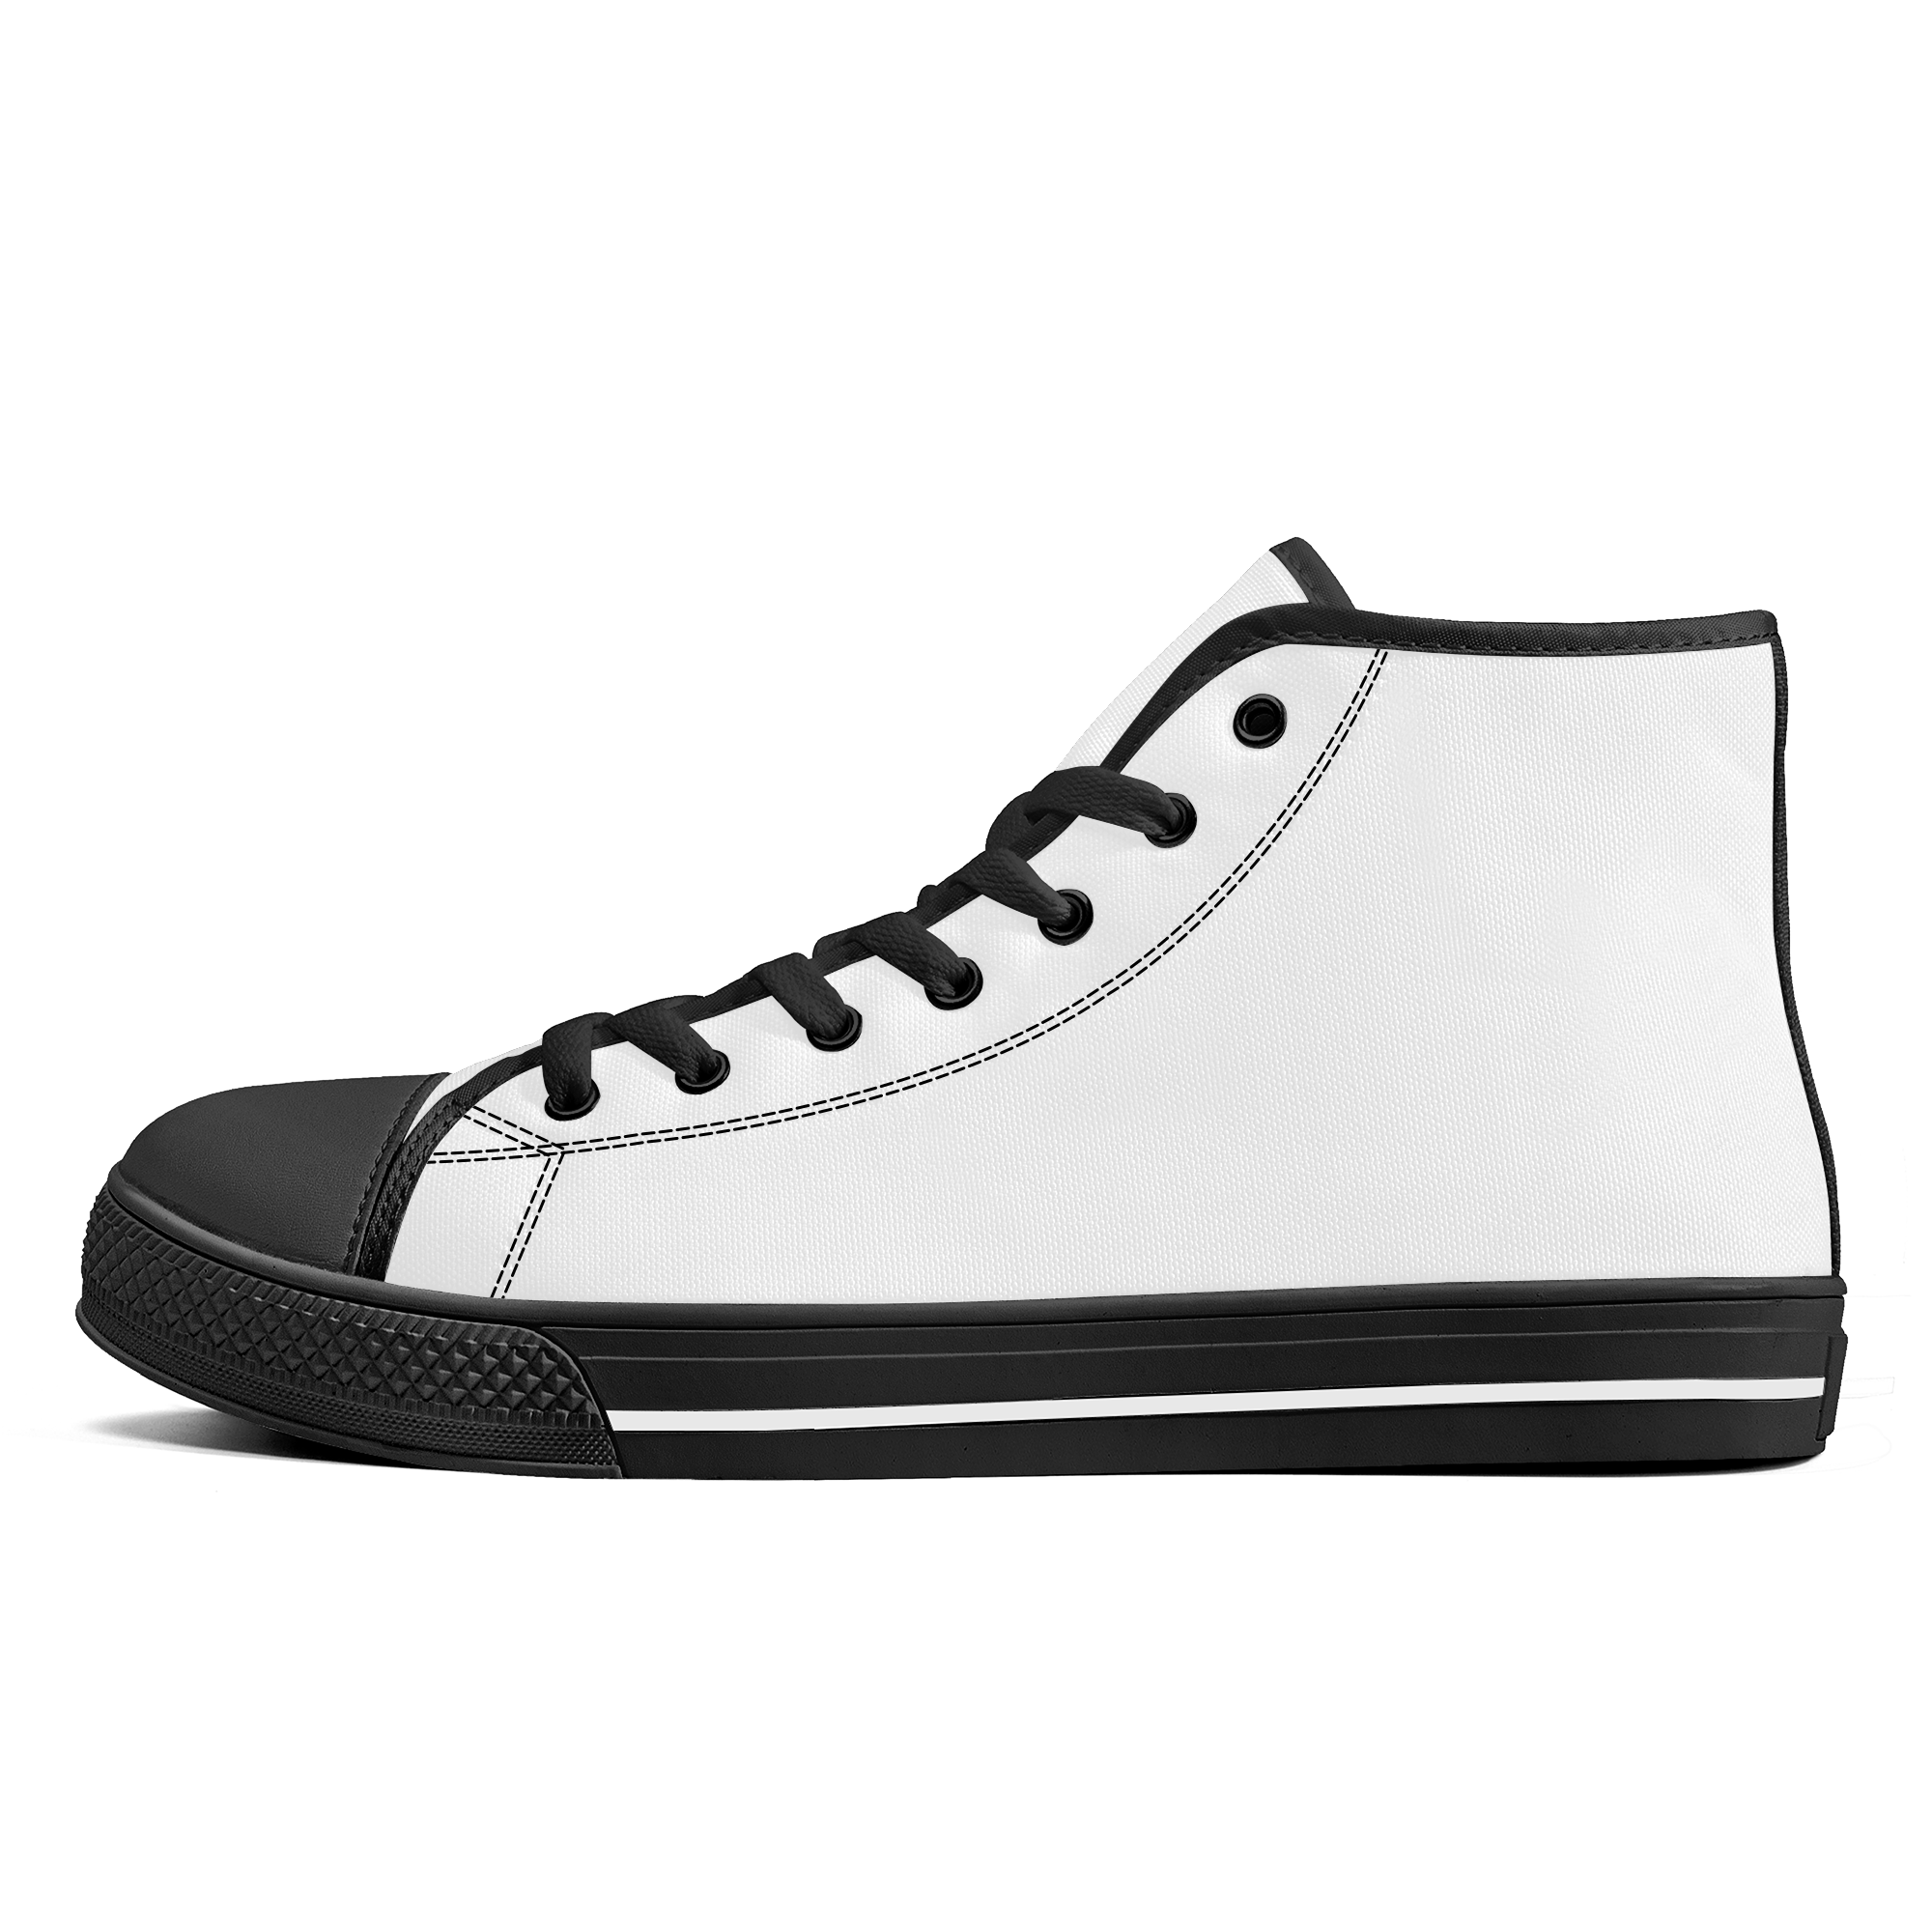 Customizable High-Top Canvas Custom Shoes With Customized Tongue - Black - Shoe Zero